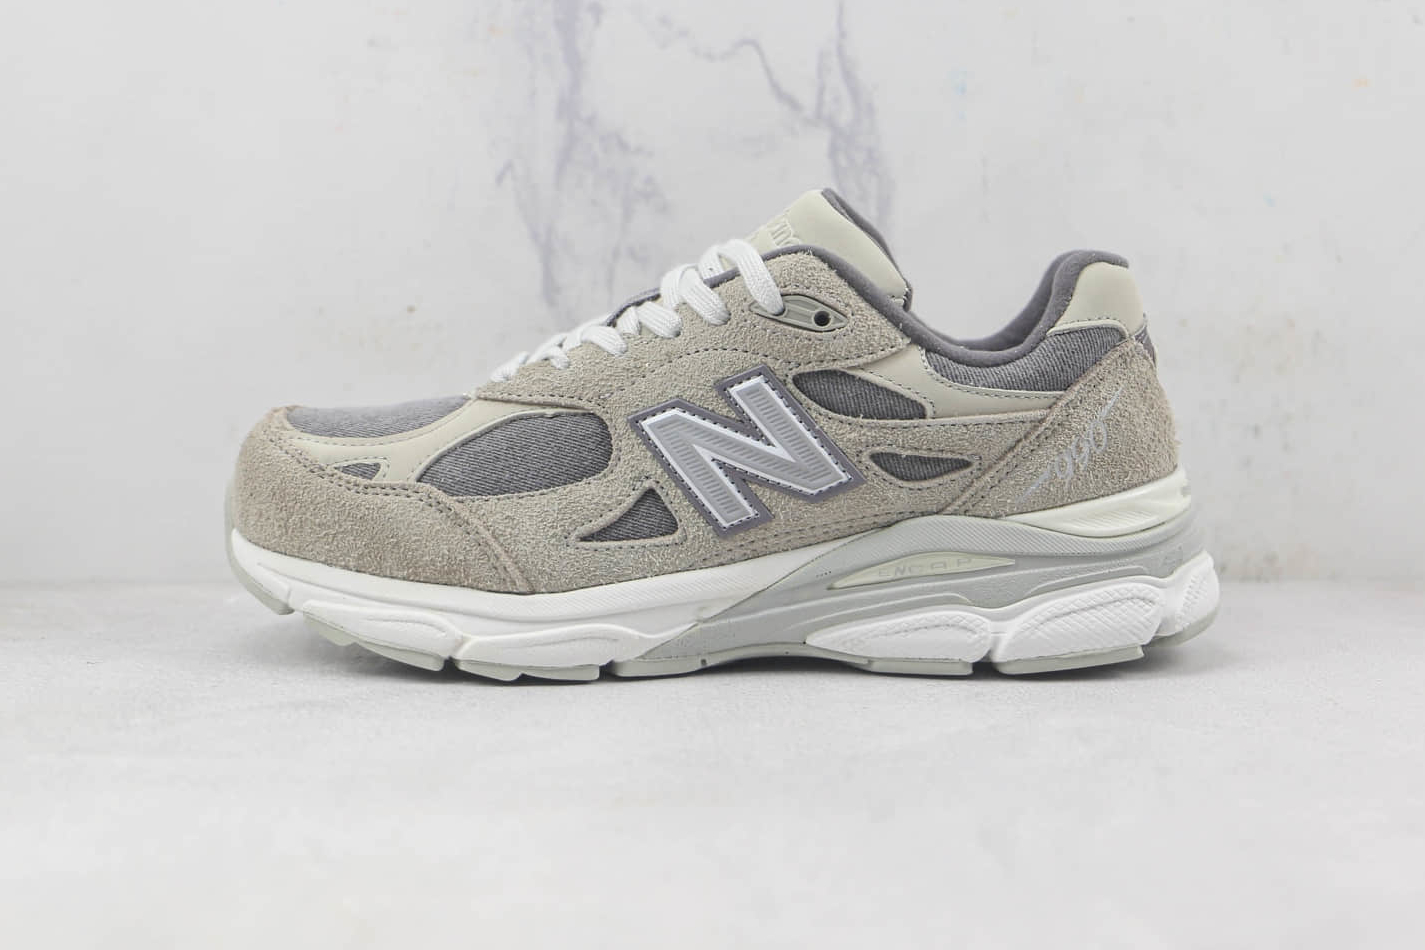 New Balance Levi's x 990v3 Made In USA 'Elephant Skin' M990LV3 - Premium Collaboration for Sneaker Enthusiasts